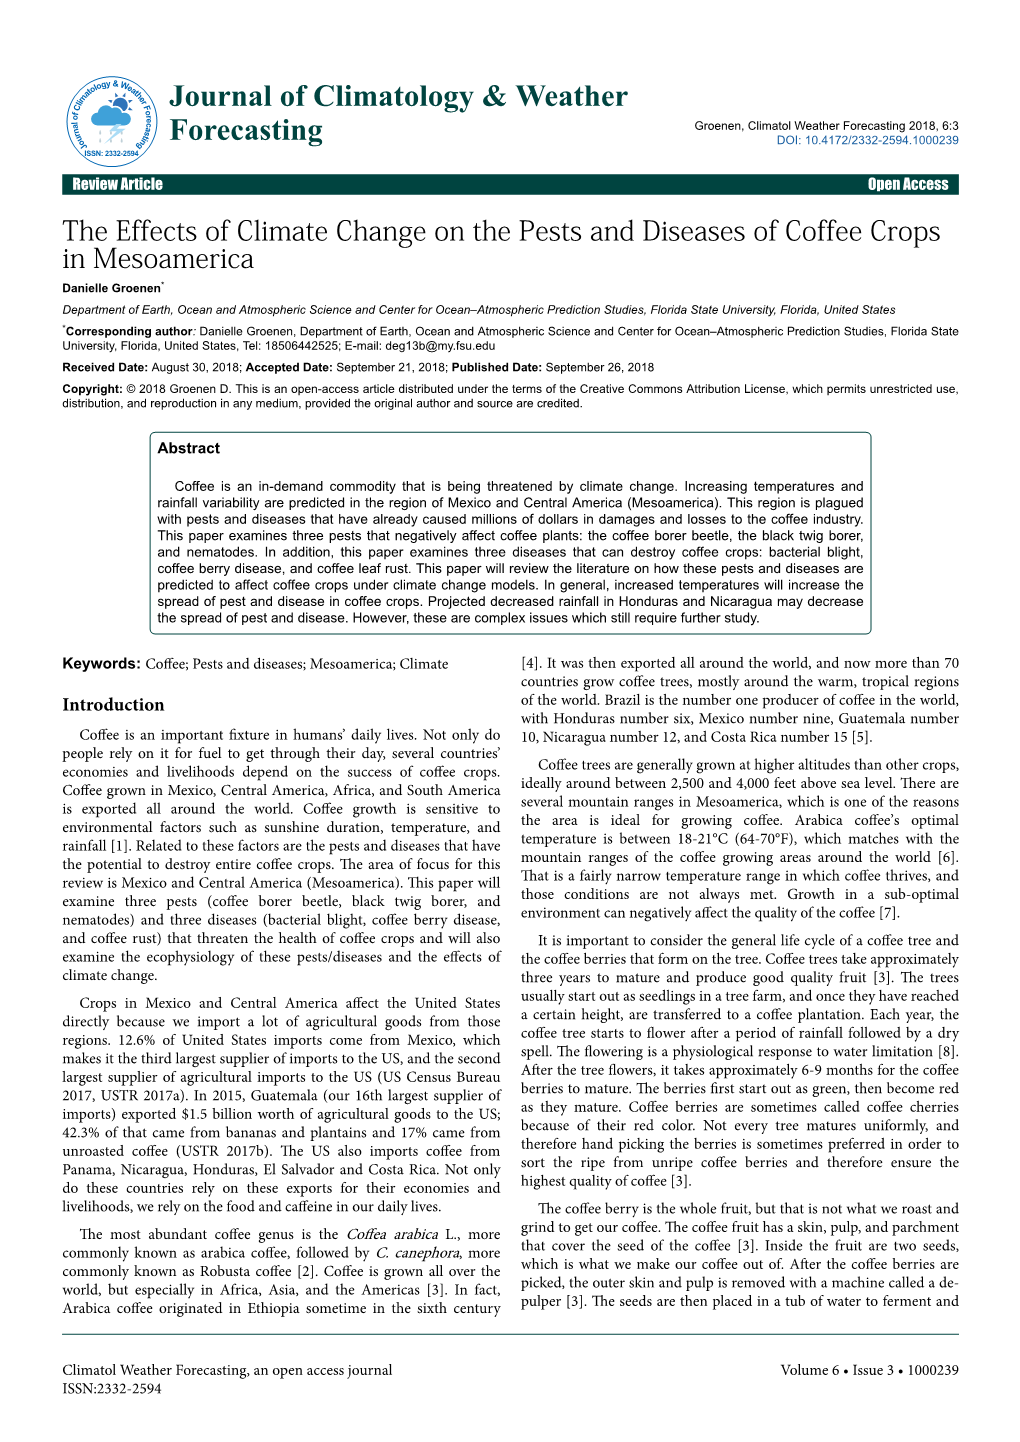 The Effects of Climate Change on the Pests and Diseases of Coffee